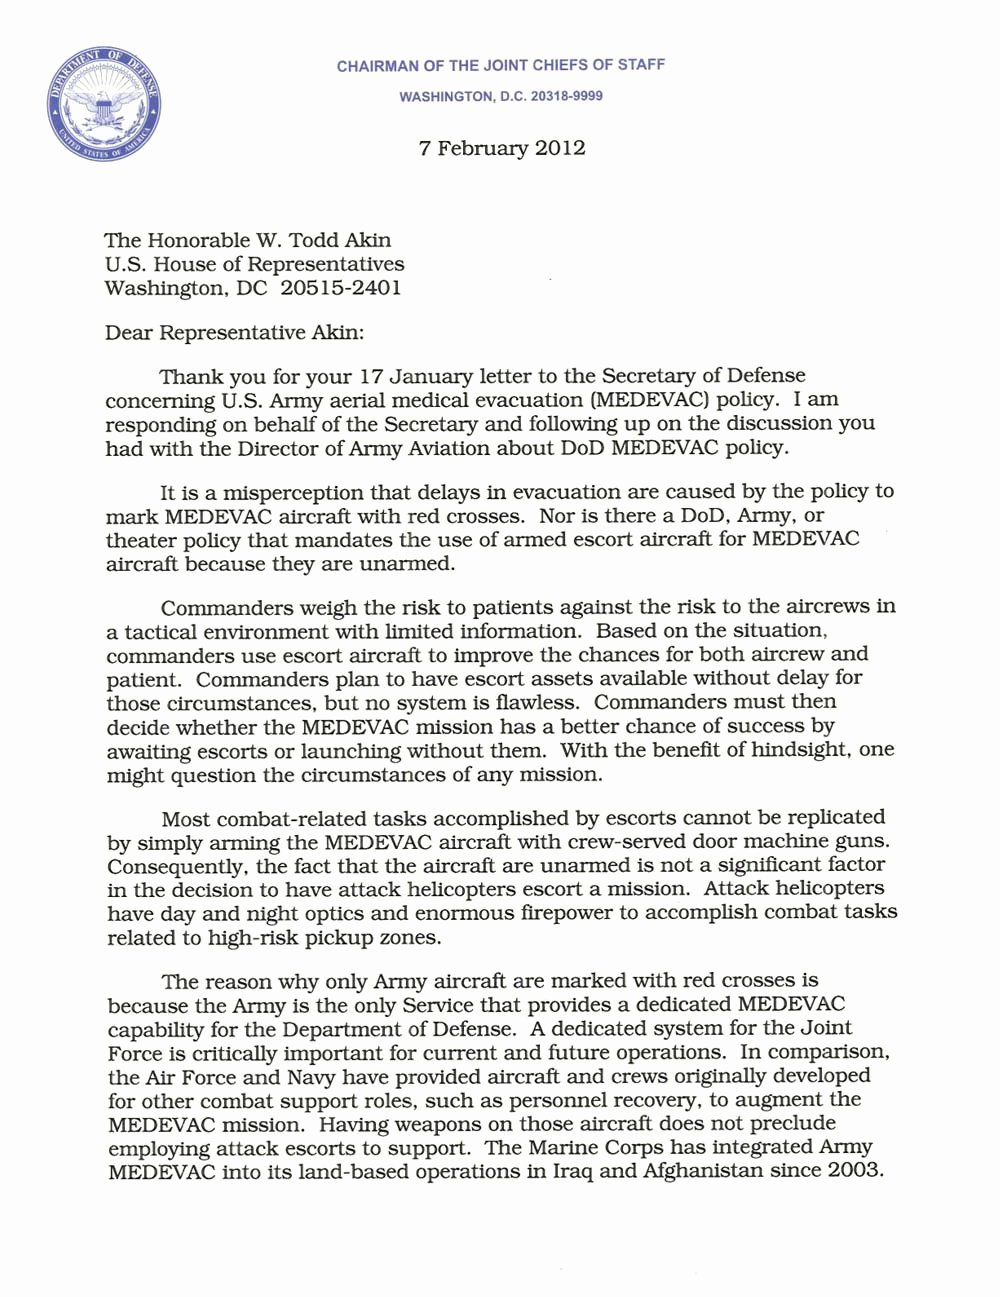 Letter to Congressman format Elegant New Letter From Joint Chiefs Of Staff to Congress